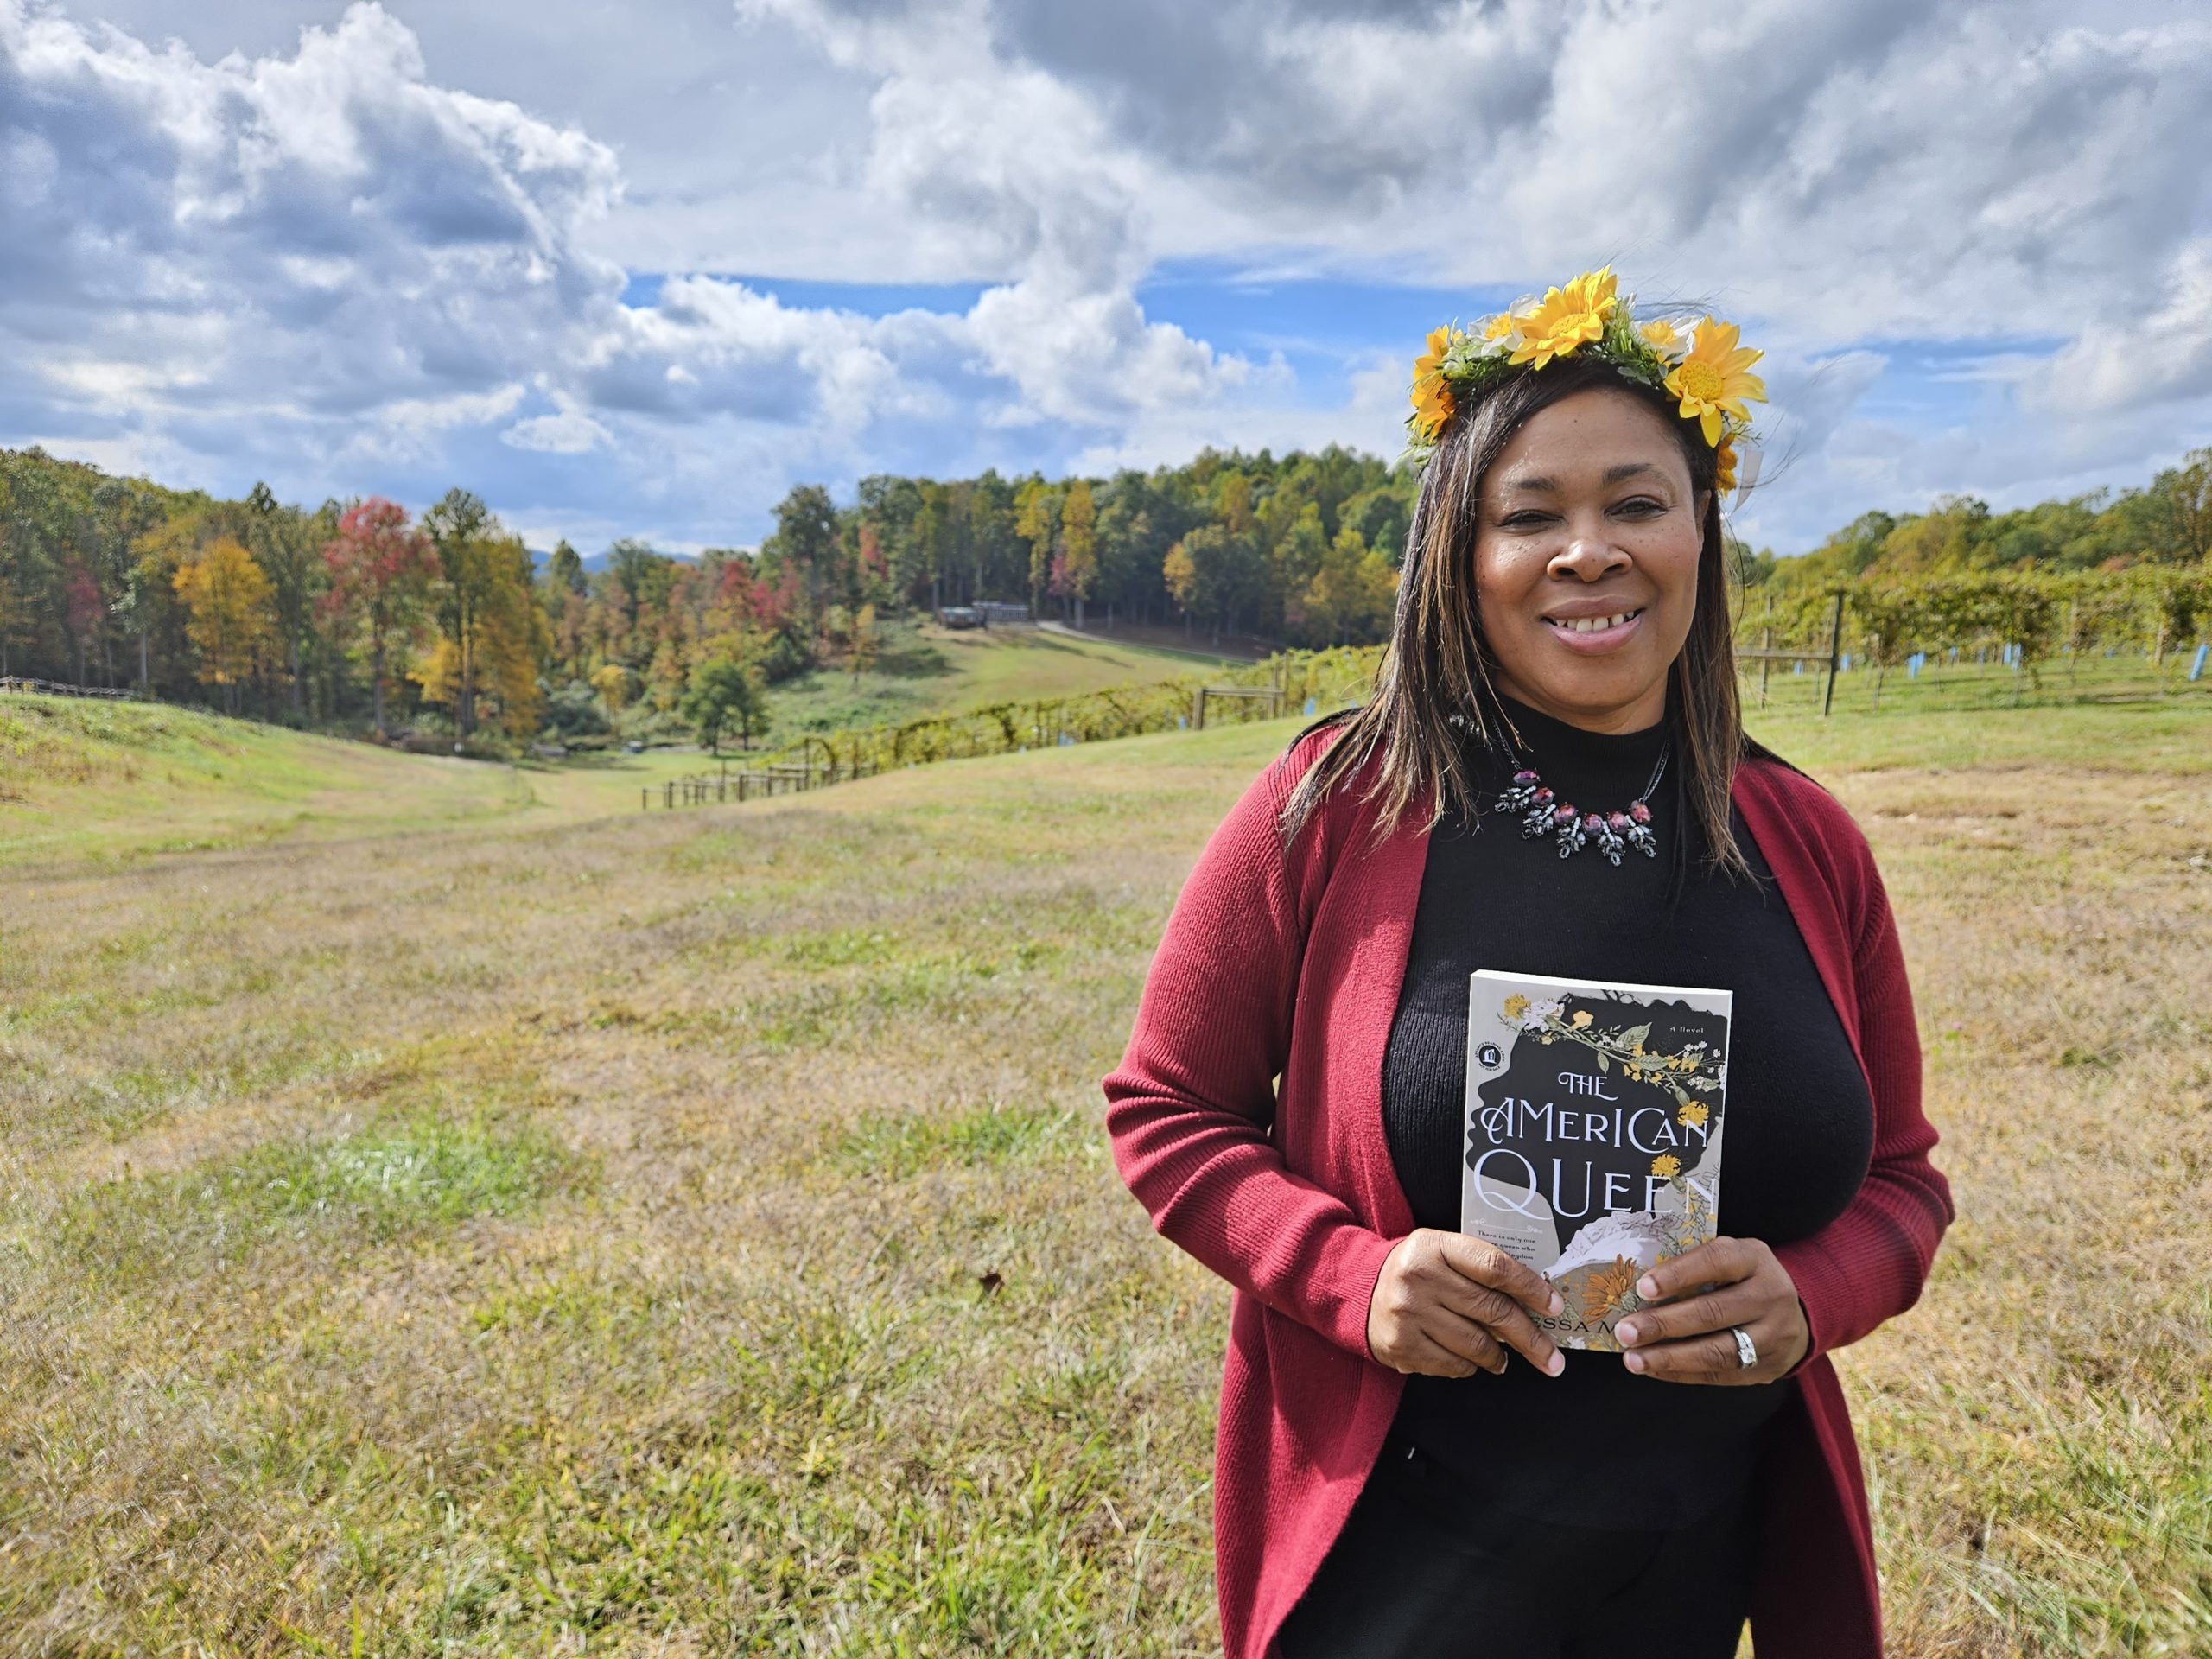 Did You Know A Black Woman Ruled As Queen In America? This New Book Tells The True Story Of Louella Montgomery